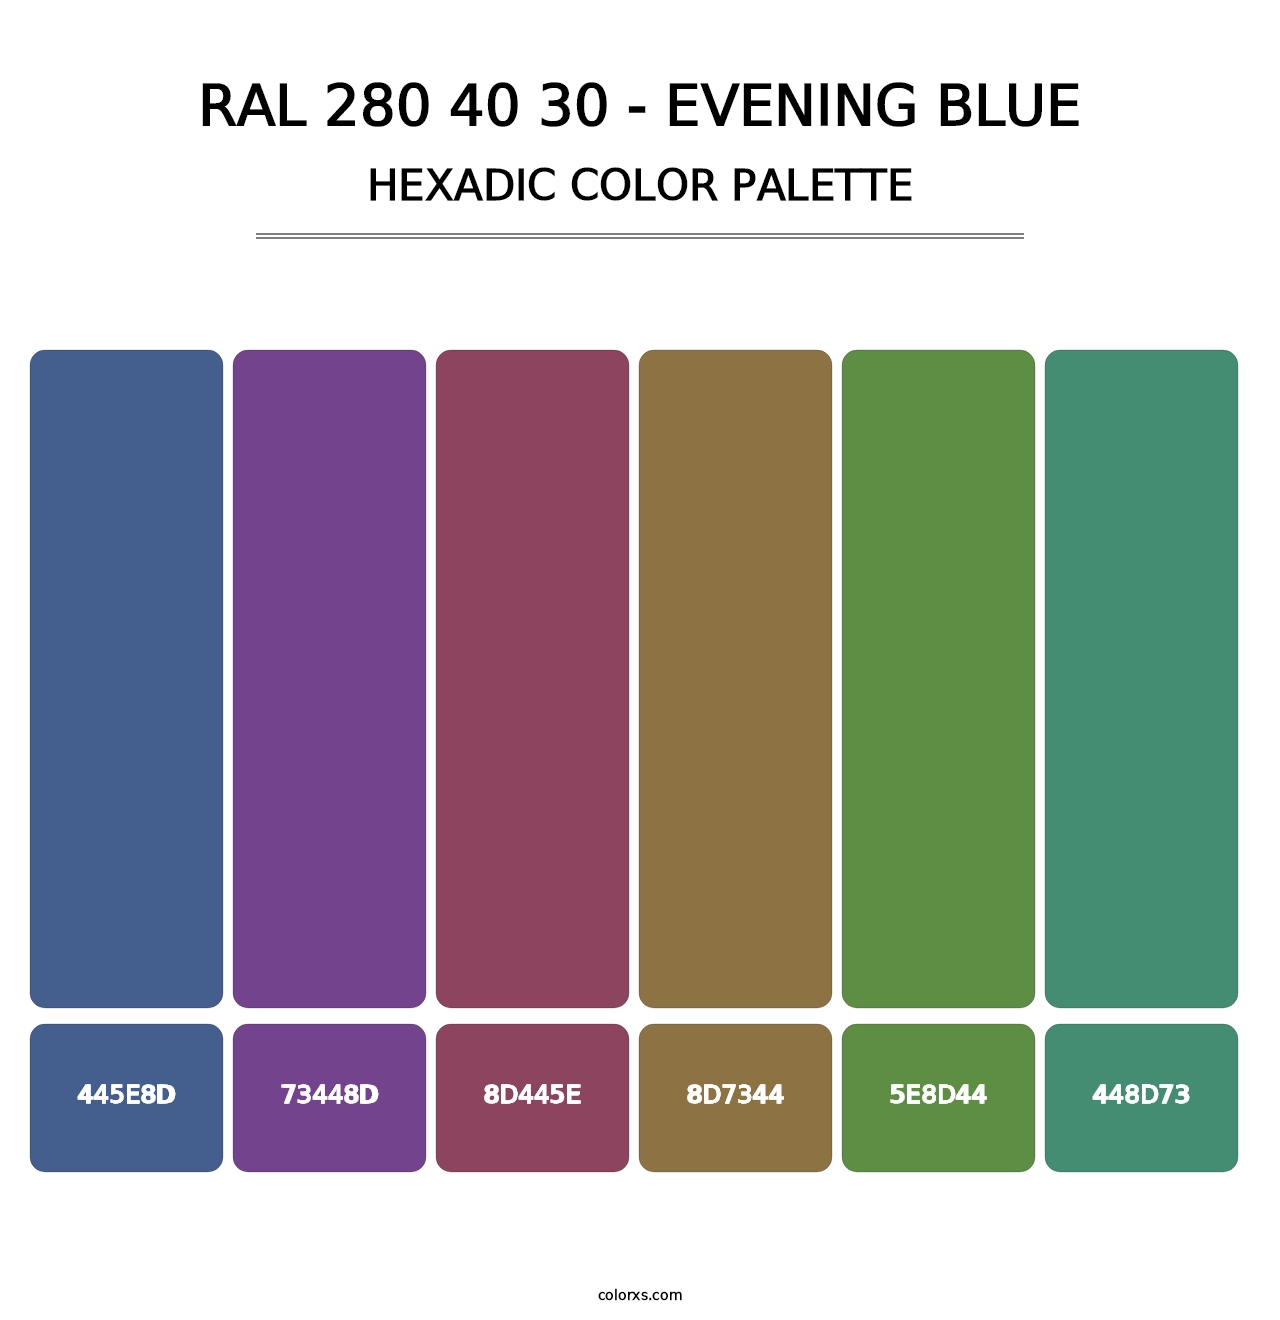 RAL 280 40 30 - Evening Blue - Hexadic Color Palette